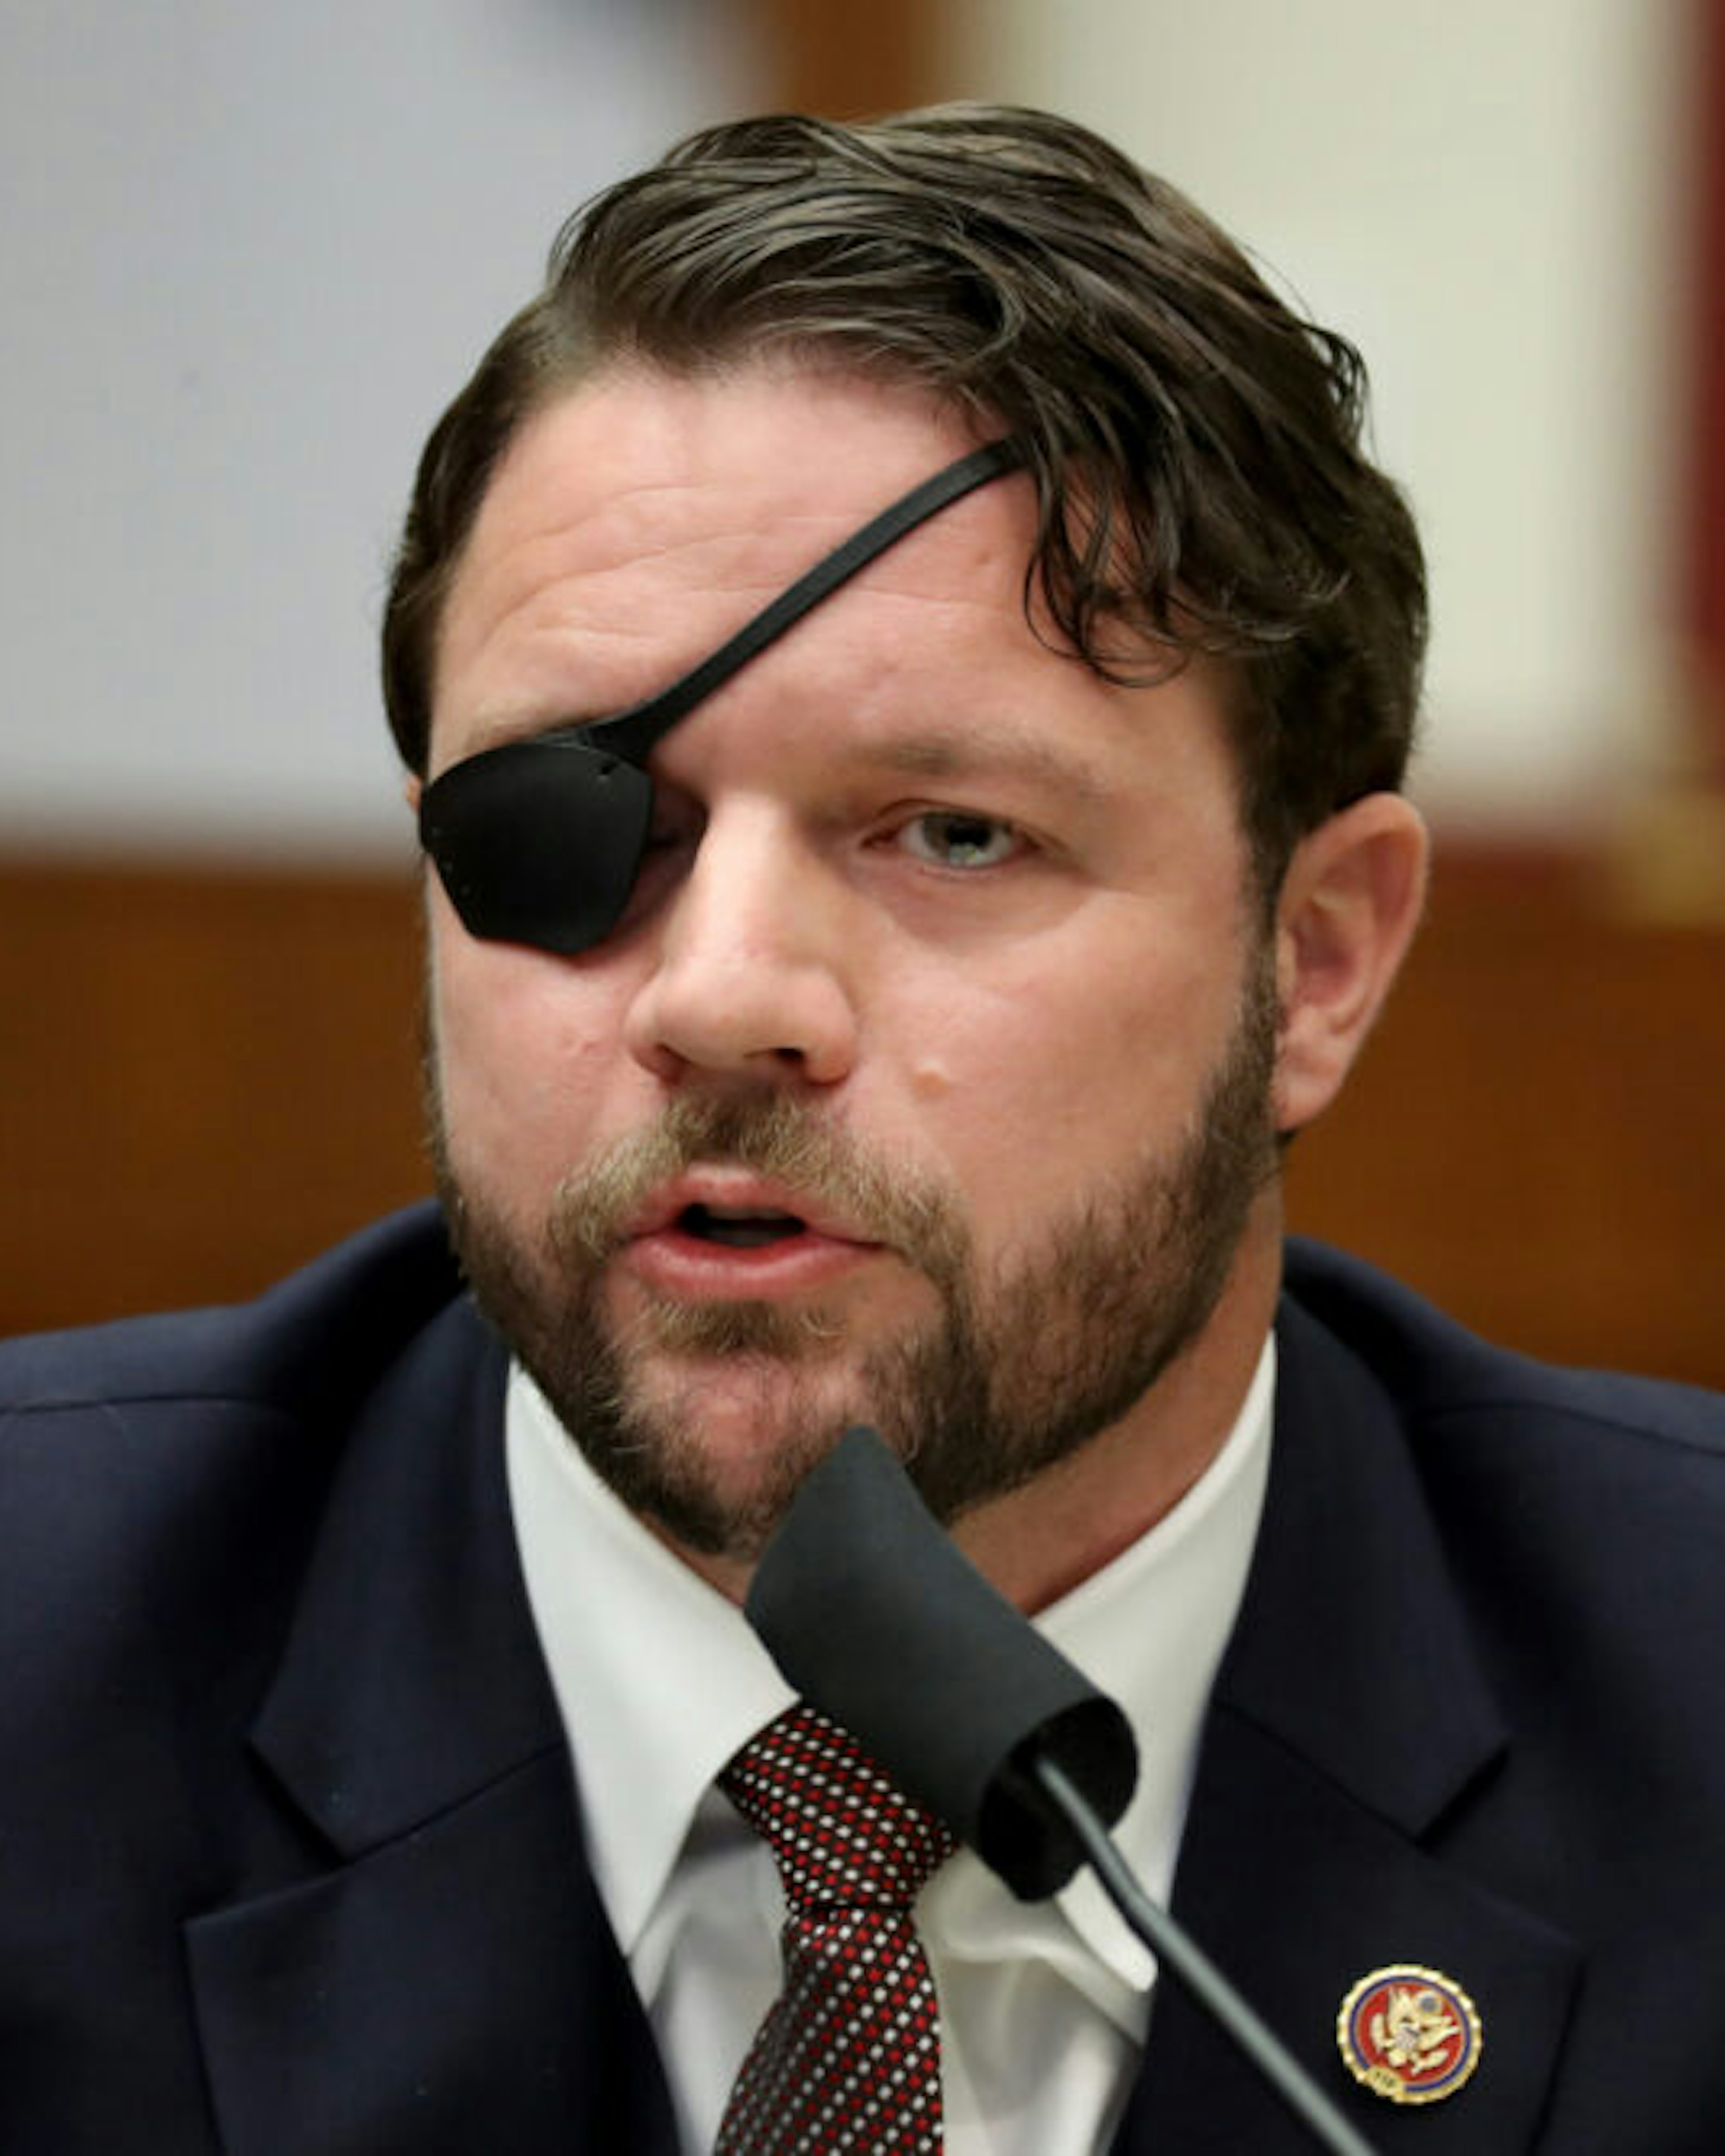 Representative Dan Crenshaw, a Republican from Texas, speaks during a House Homeland Security Committee security hearing in Washington, D.C., U.S., on Thursday, Sept. 17, 2020. The hearing focused on international terrorism threats, the rise in domestic terrorism incidents and recent shootings as well as election security and cyber threats.